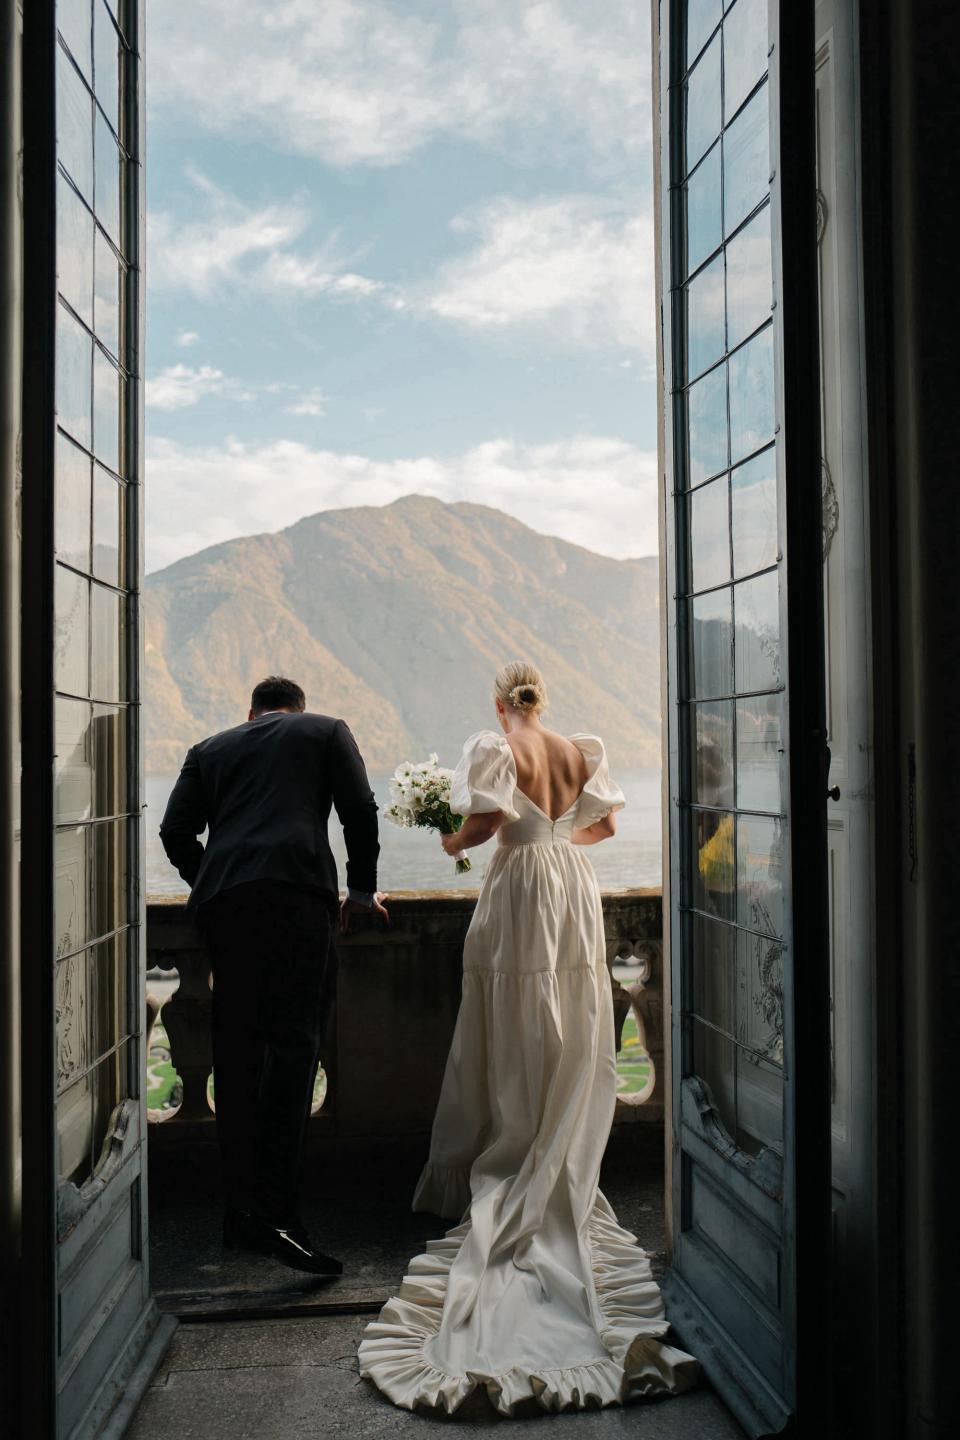 A bride and groom look down at a lake on a balcony in their wedding attire.